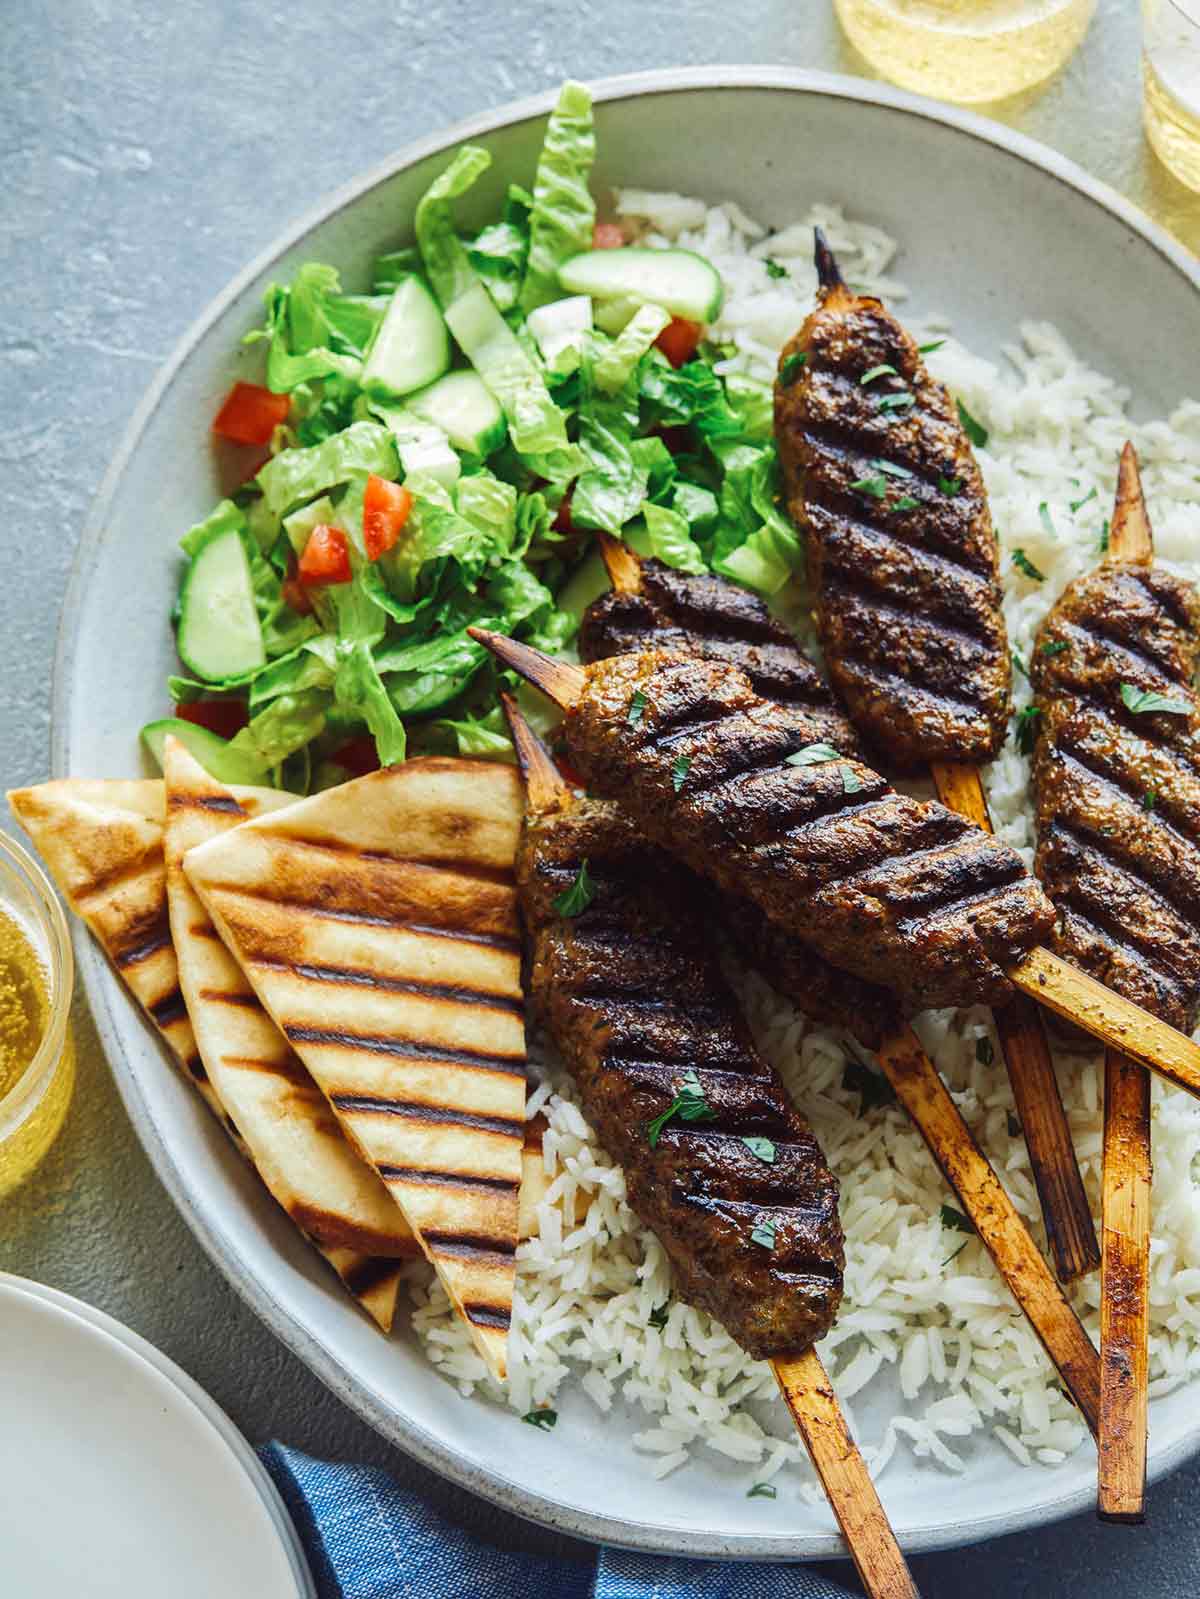 Kebabs on skewers with salad on a plate.